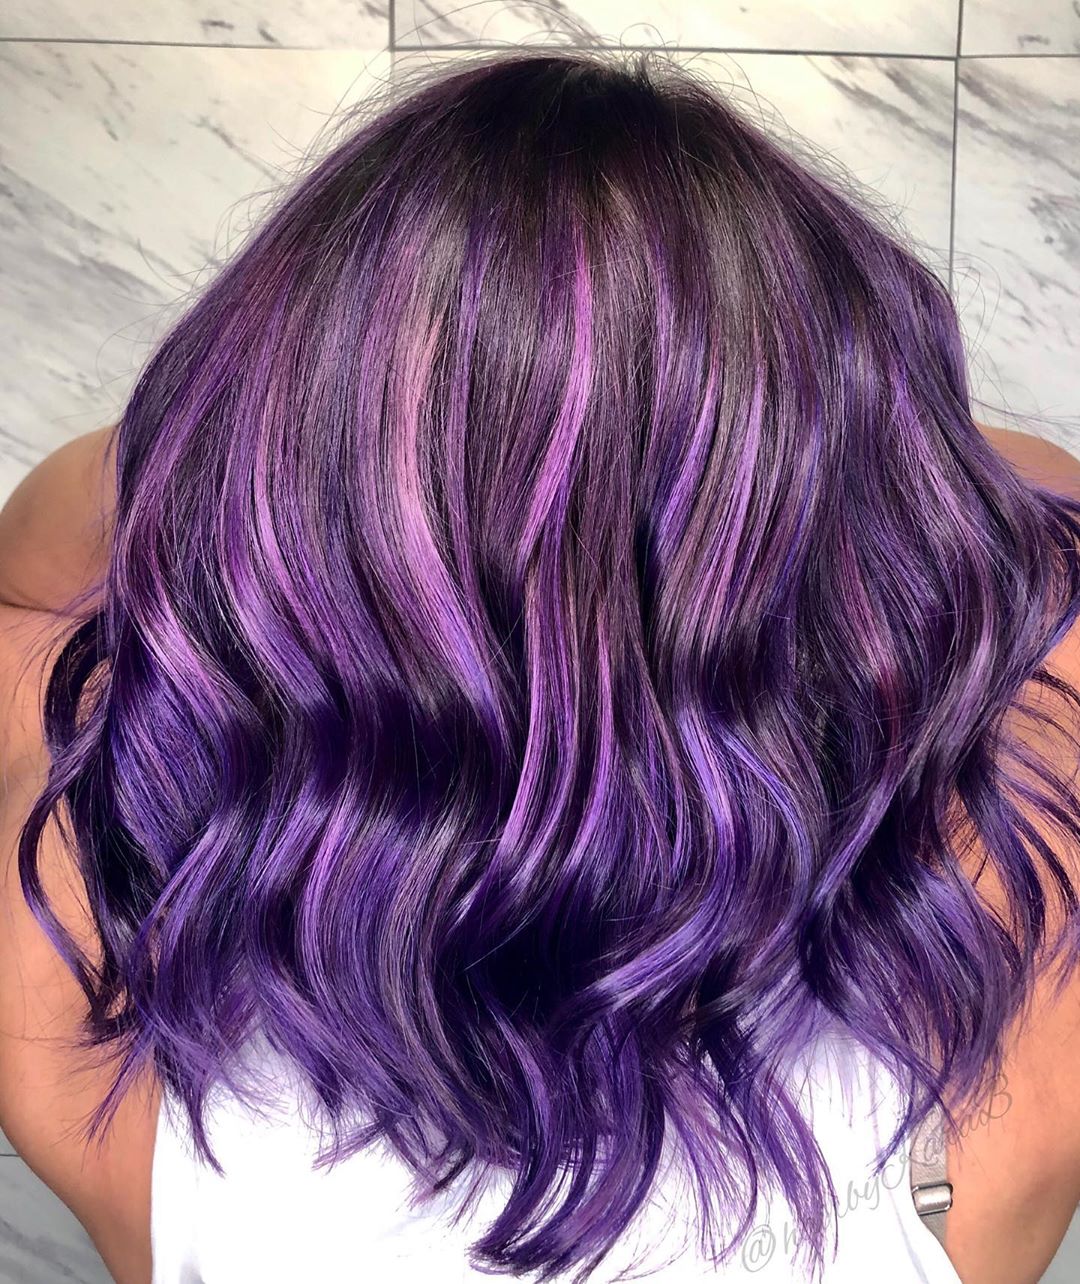 34 Incredible Violet Hair Color Ideas to Inspire You in 2023